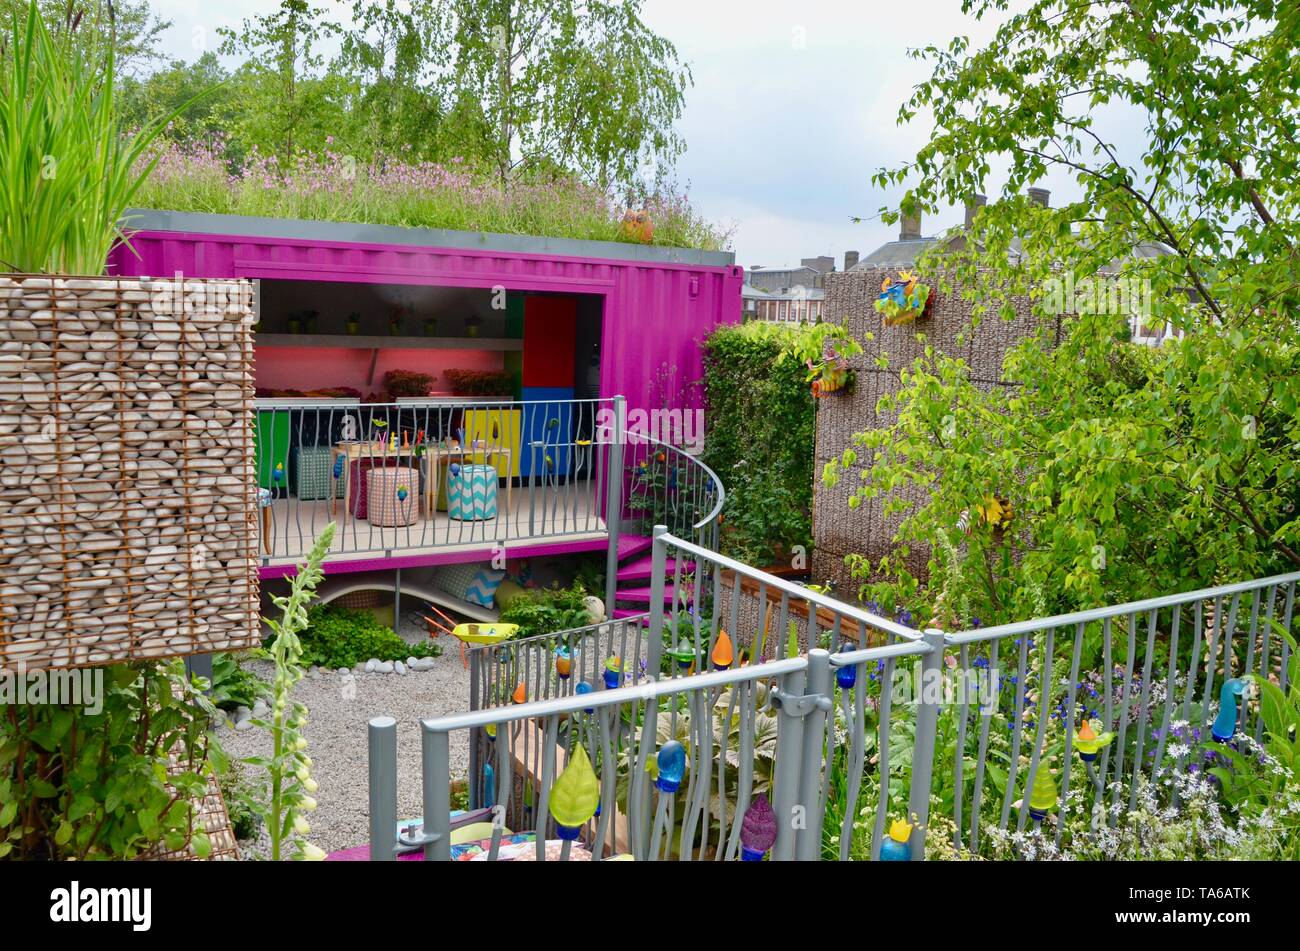 The Montessori Centenary Children's Garden at the 2019 rhs chelsea flower show in london england Stock Photo